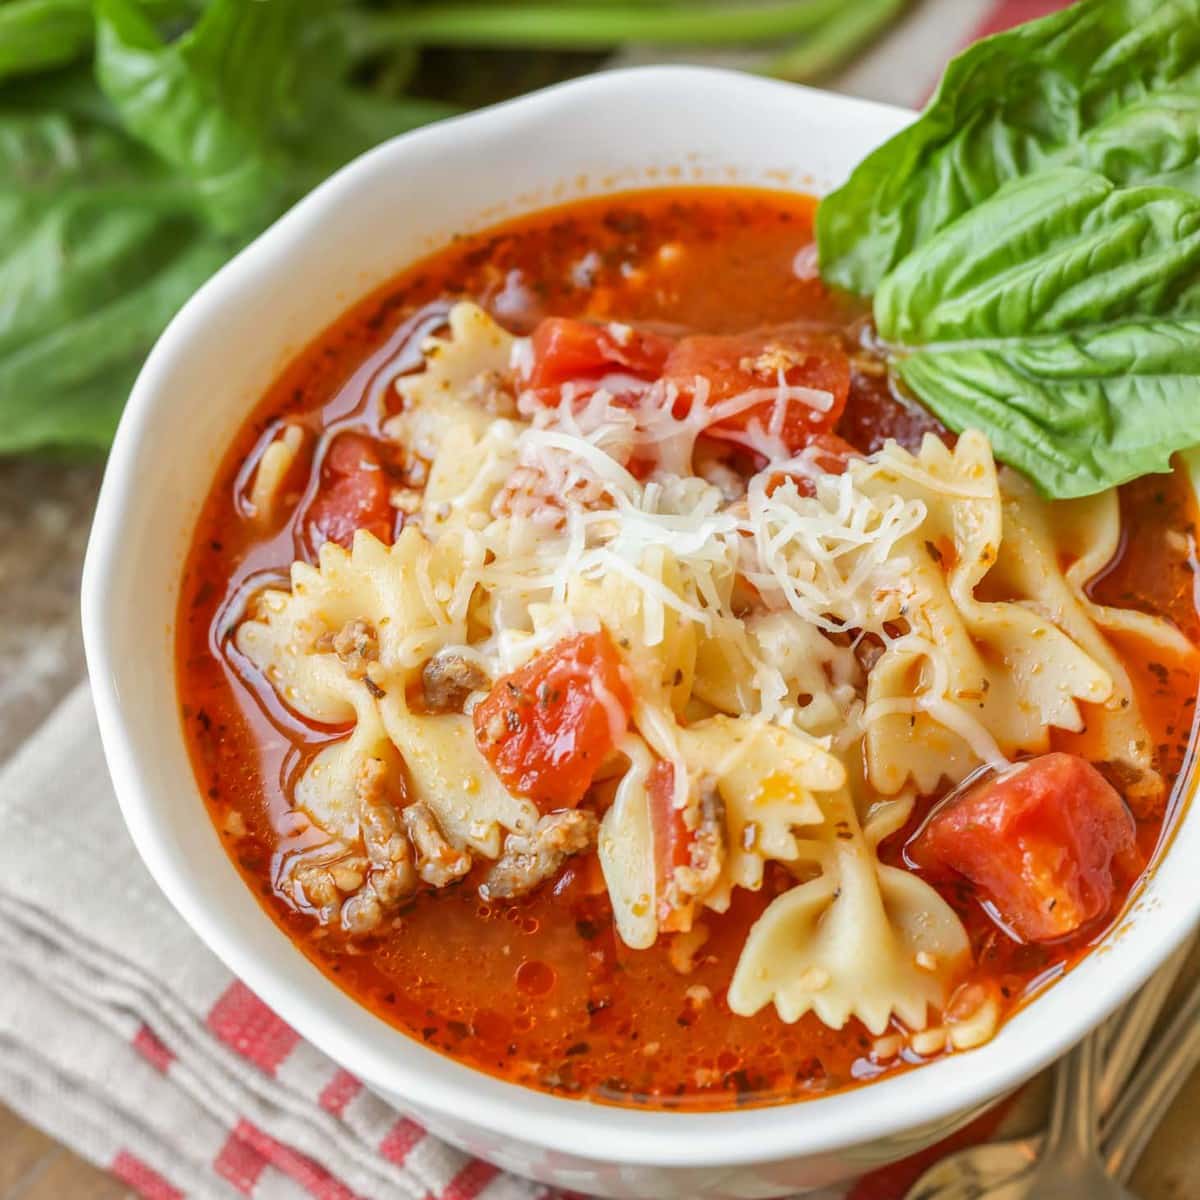 Italian Soups - Lasagna soup served with fresh shredded cheese.